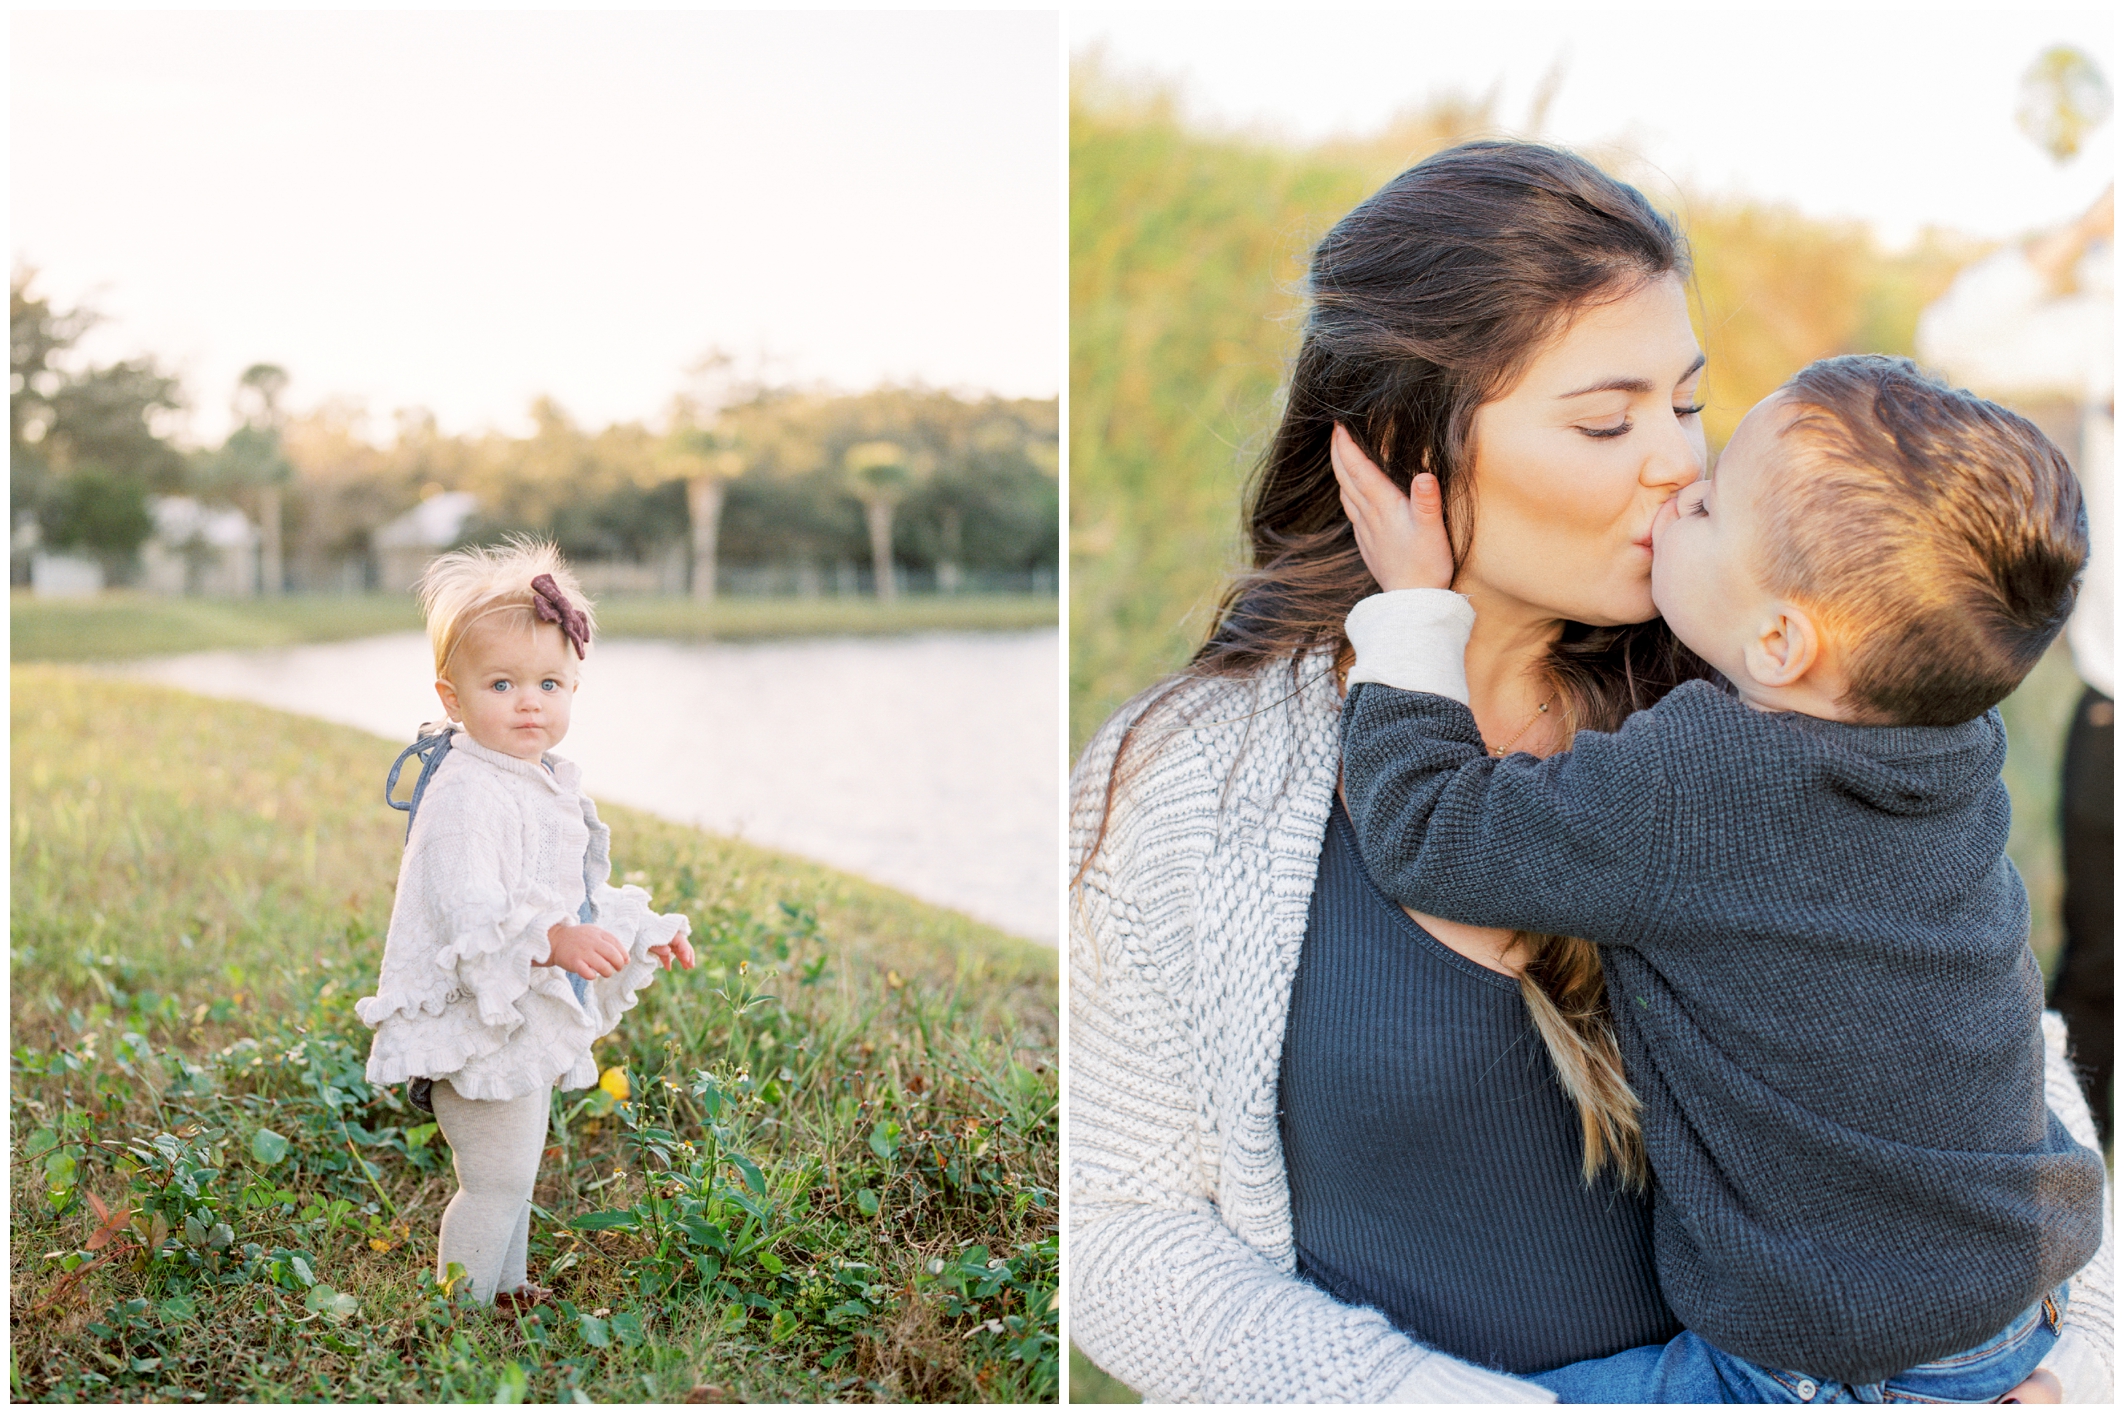 Lisa Silva Photography- Ponte Vedra Beach, St. Augustine and Jacksonville, Florida Fine Art Film Destination Wedding Photography- Family Lifestyle Session in St. Augustine_007a.jpg